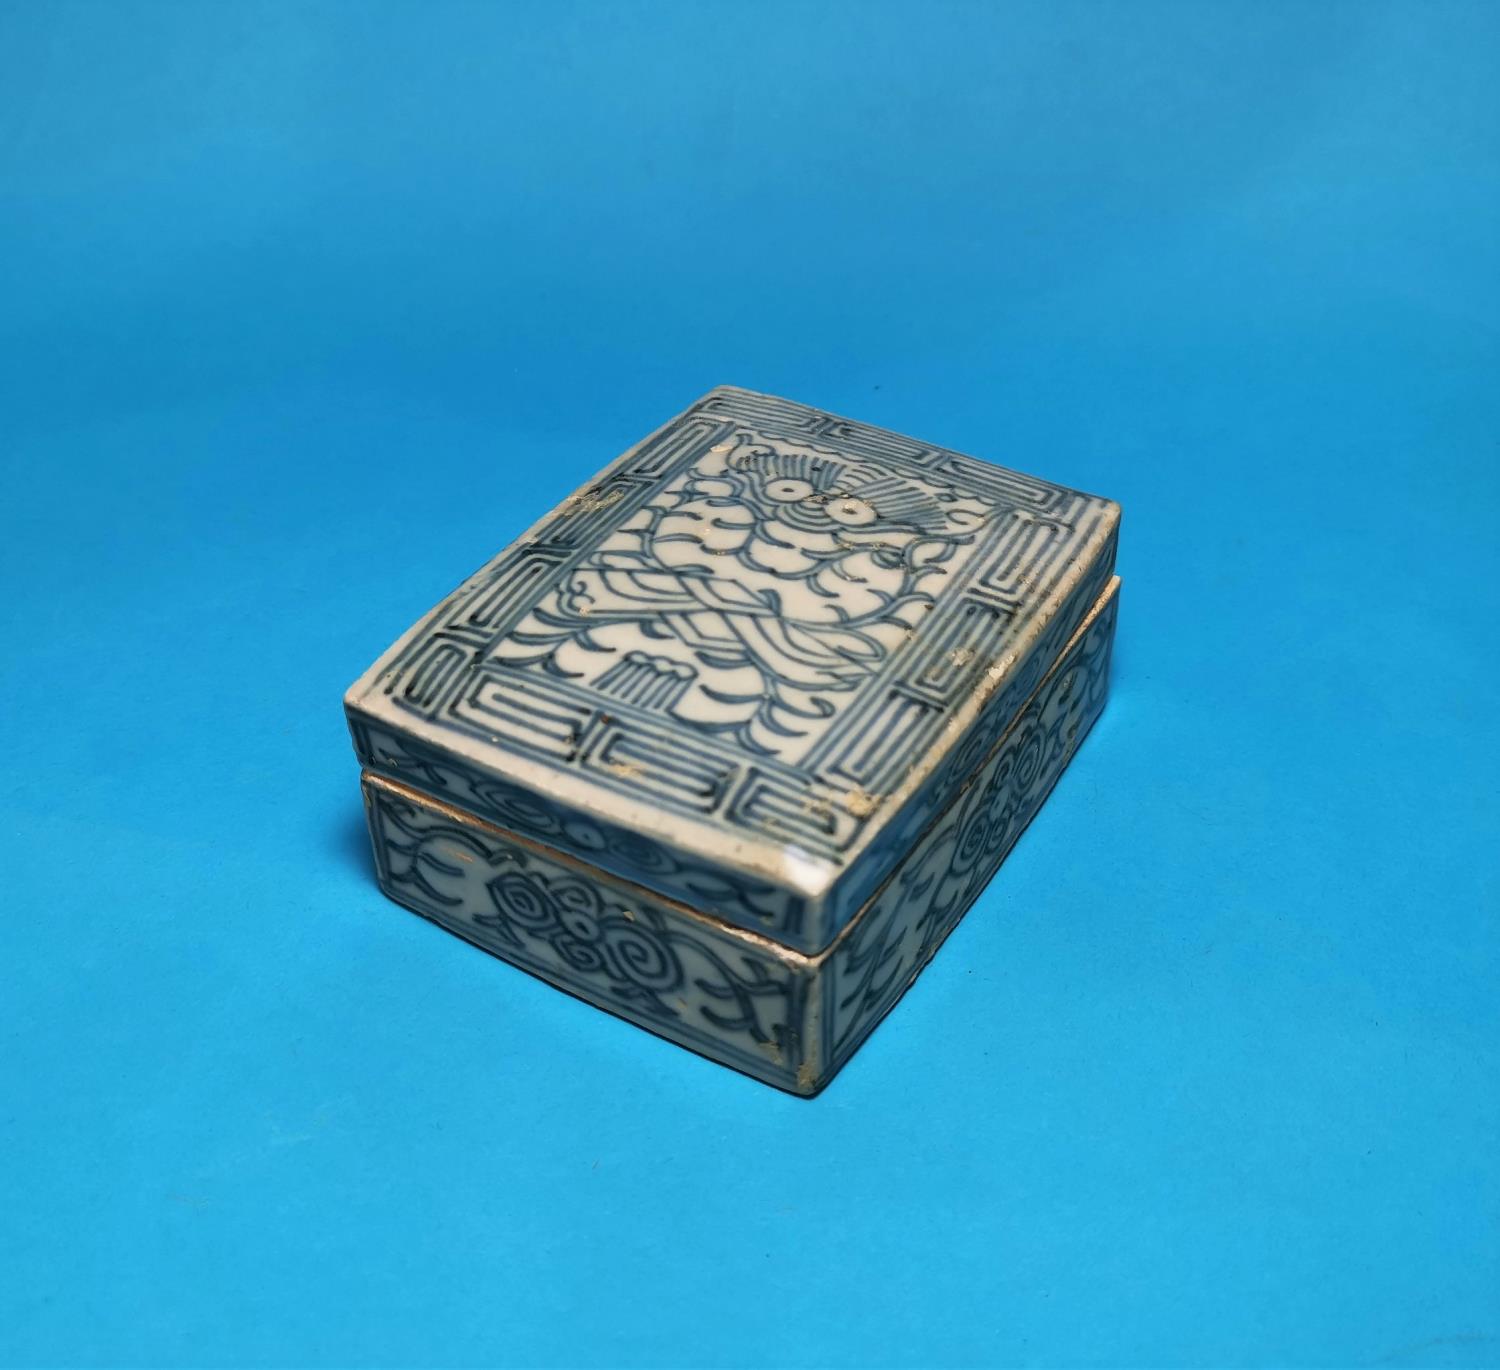 A 19th century Chinese porcelain rectangular box with underglaze blue decoration, with